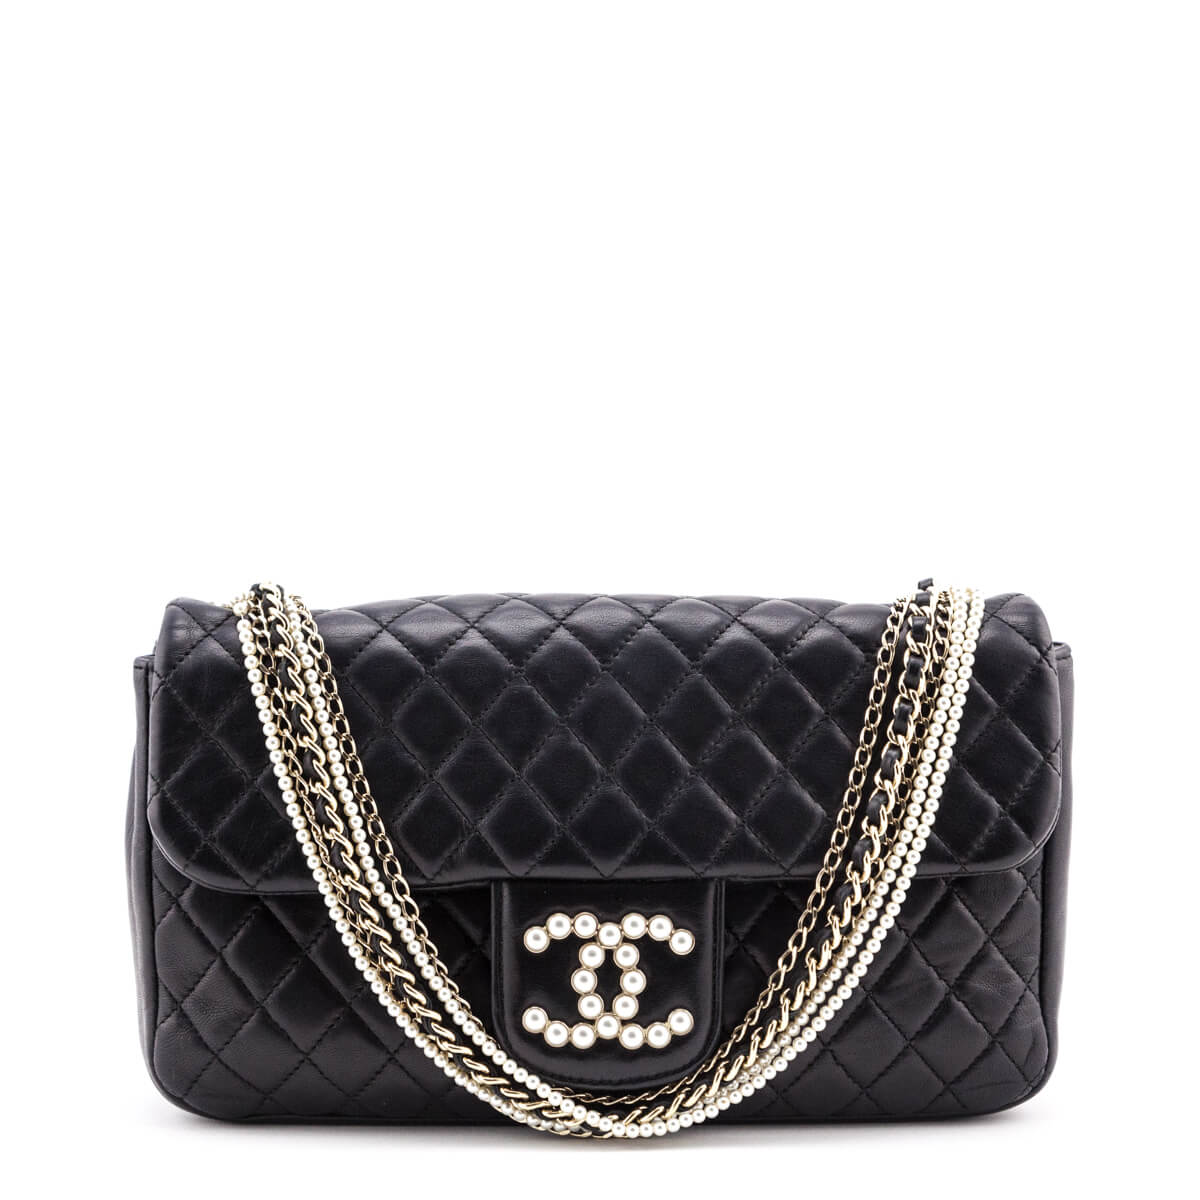 Chanel Black Quilted Lambskin Medium Westminster Flap Bag - Love that Bag etc - Preowned Authentic Designer Handbags & Preloved Fashions